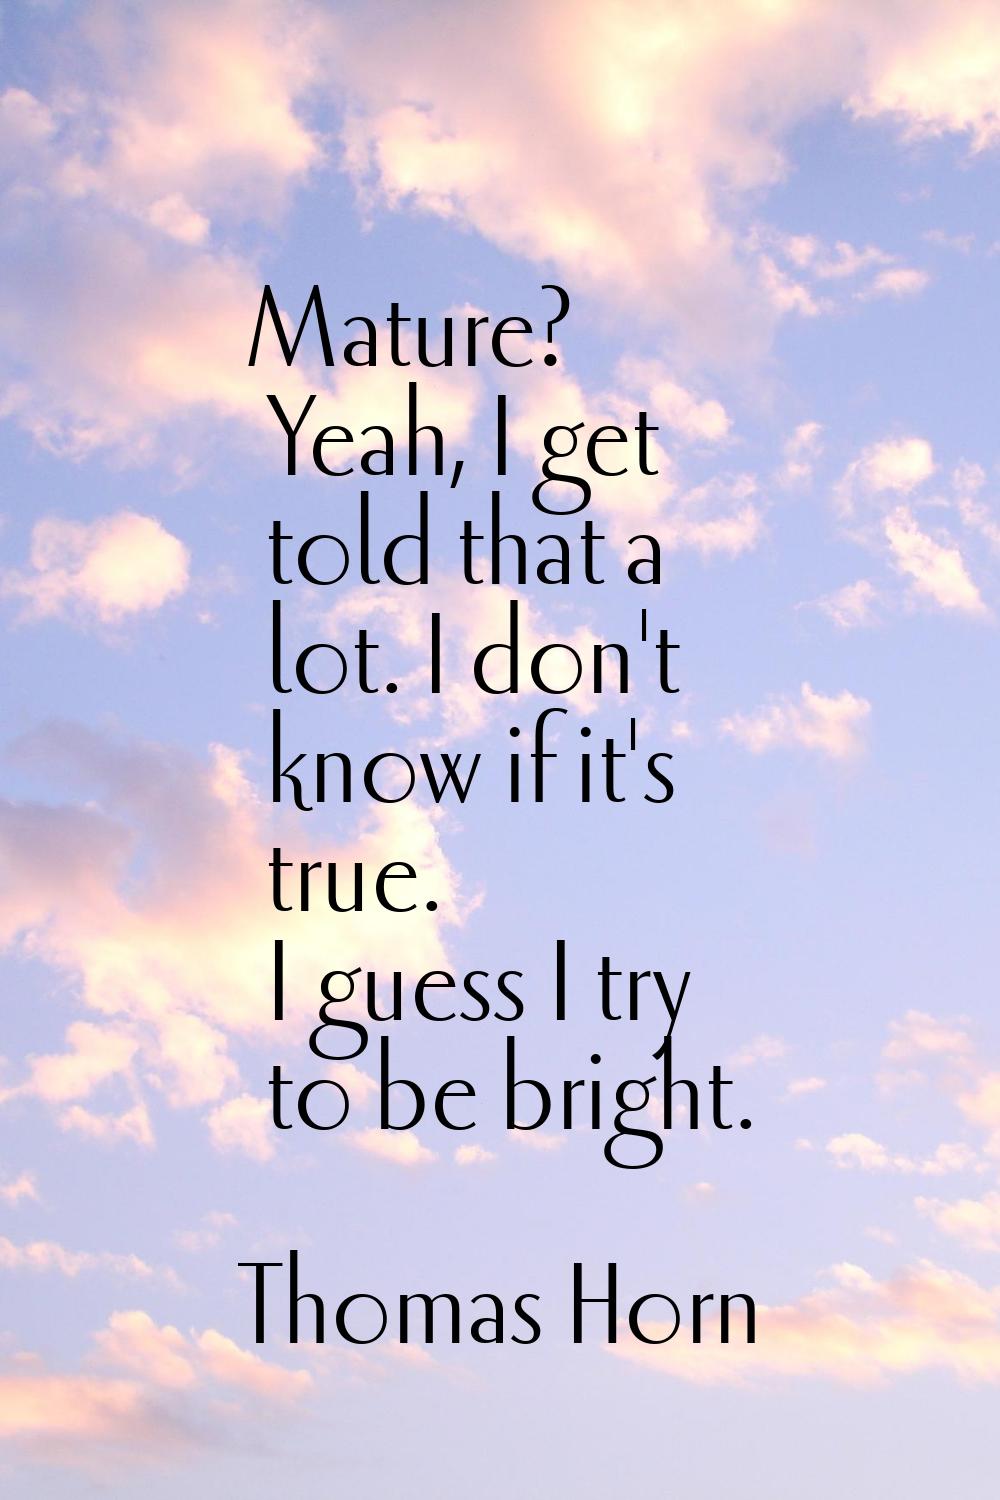 Mature? Yeah, I get told that a lot. I don't know if it's true. I guess I try to be bright.